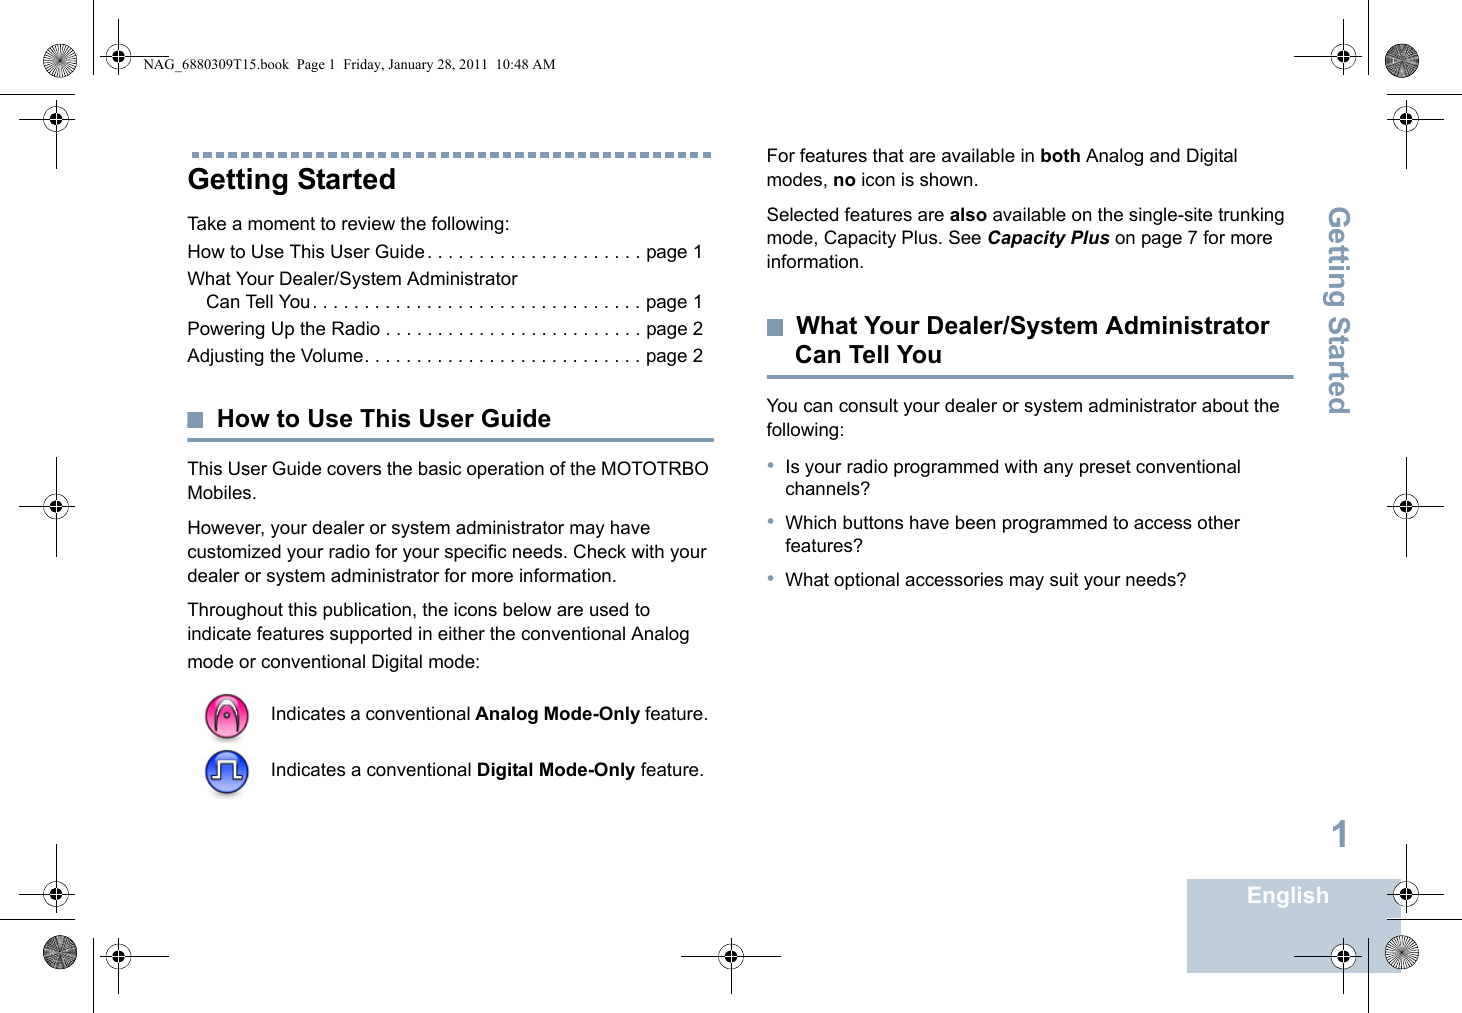 Getting StartedEnglish1Getting StartedTake a moment to review the following:How to Use This User Guide. . . . . . . . . . . . . . . . . . . . . page 1What Your Dealer/System Administrator Can Tell You. . . . . . . . . . . . . . . . . . . . . . . . . . . . . . . . page 1Powering Up the Radio . . . . . . . . . . . . . . . . . . . . . . . . . page 2Adjusting the Volume. . . . . . . . . . . . . . . . . . . . . . . . . . . page 2How to Use This User GuideThis User Guide covers the basic operation of the MOTOTRBO Mobiles.However, your dealer or system administrator may have customized your radio for your specific needs. Check with your dealer or system administrator for more information.Throughout this publication, the icons below are used to indicate features supported in either the conventional Analog mode or conventional Digital mode:For features that are available in both Analog and Digital modes, no icon is shown.Selected features are also available on the single-site trunking mode, Capacity Plus. See Capacity Plus on page 7 for more information.What Your Dealer/System Administrator Can Tell YouYou can consult your dealer or system administrator about the following:•Is your radio programmed with any preset conventional channels?•Which buttons have been programmed to access other features? •What optional accessories may suit your needs?Indicates a conventional Analog Mode-Only feature.Indicates a conventional Digital Mode-Only feature.NAG_6880309T15.book  Page 1  Friday, January 28, 2011  10:48 AM